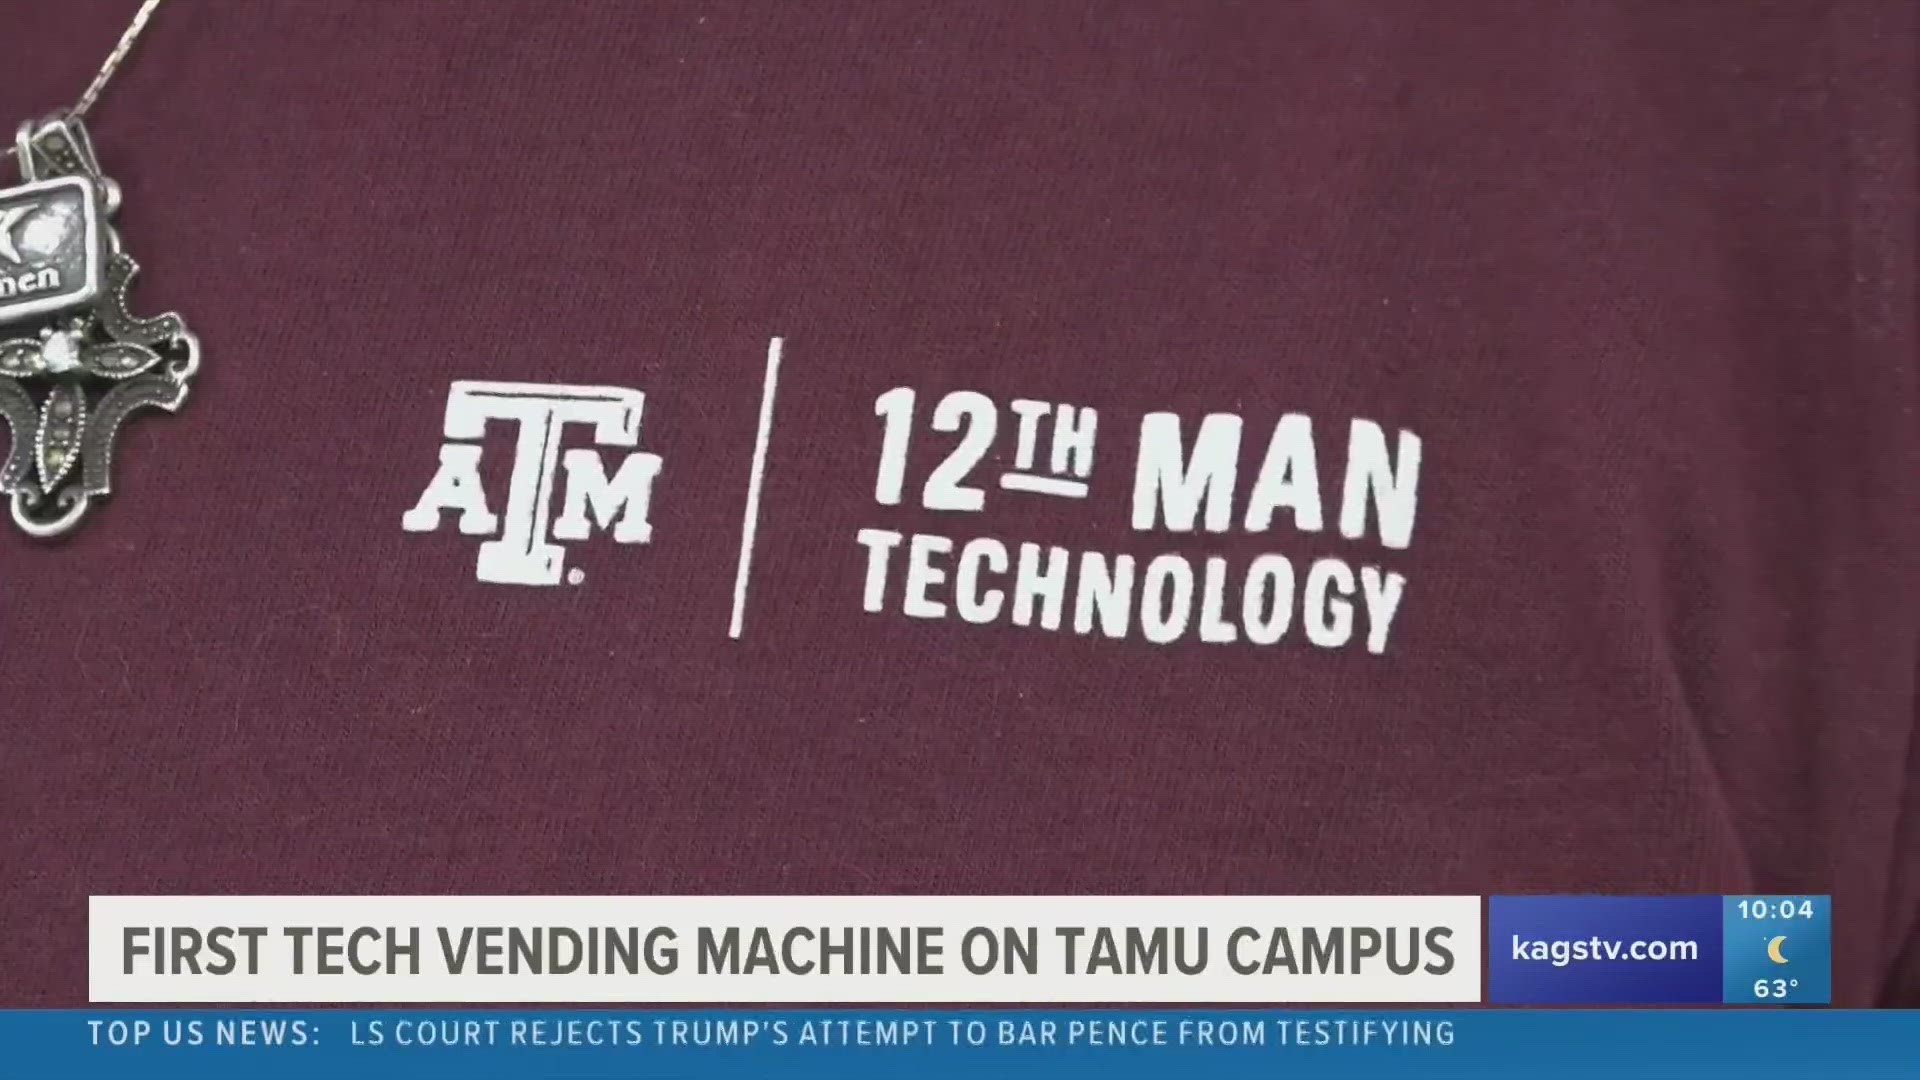 First Technology Vending Machine On Campus Brings New Level Of Convenience  To Students - Texas A&M Today